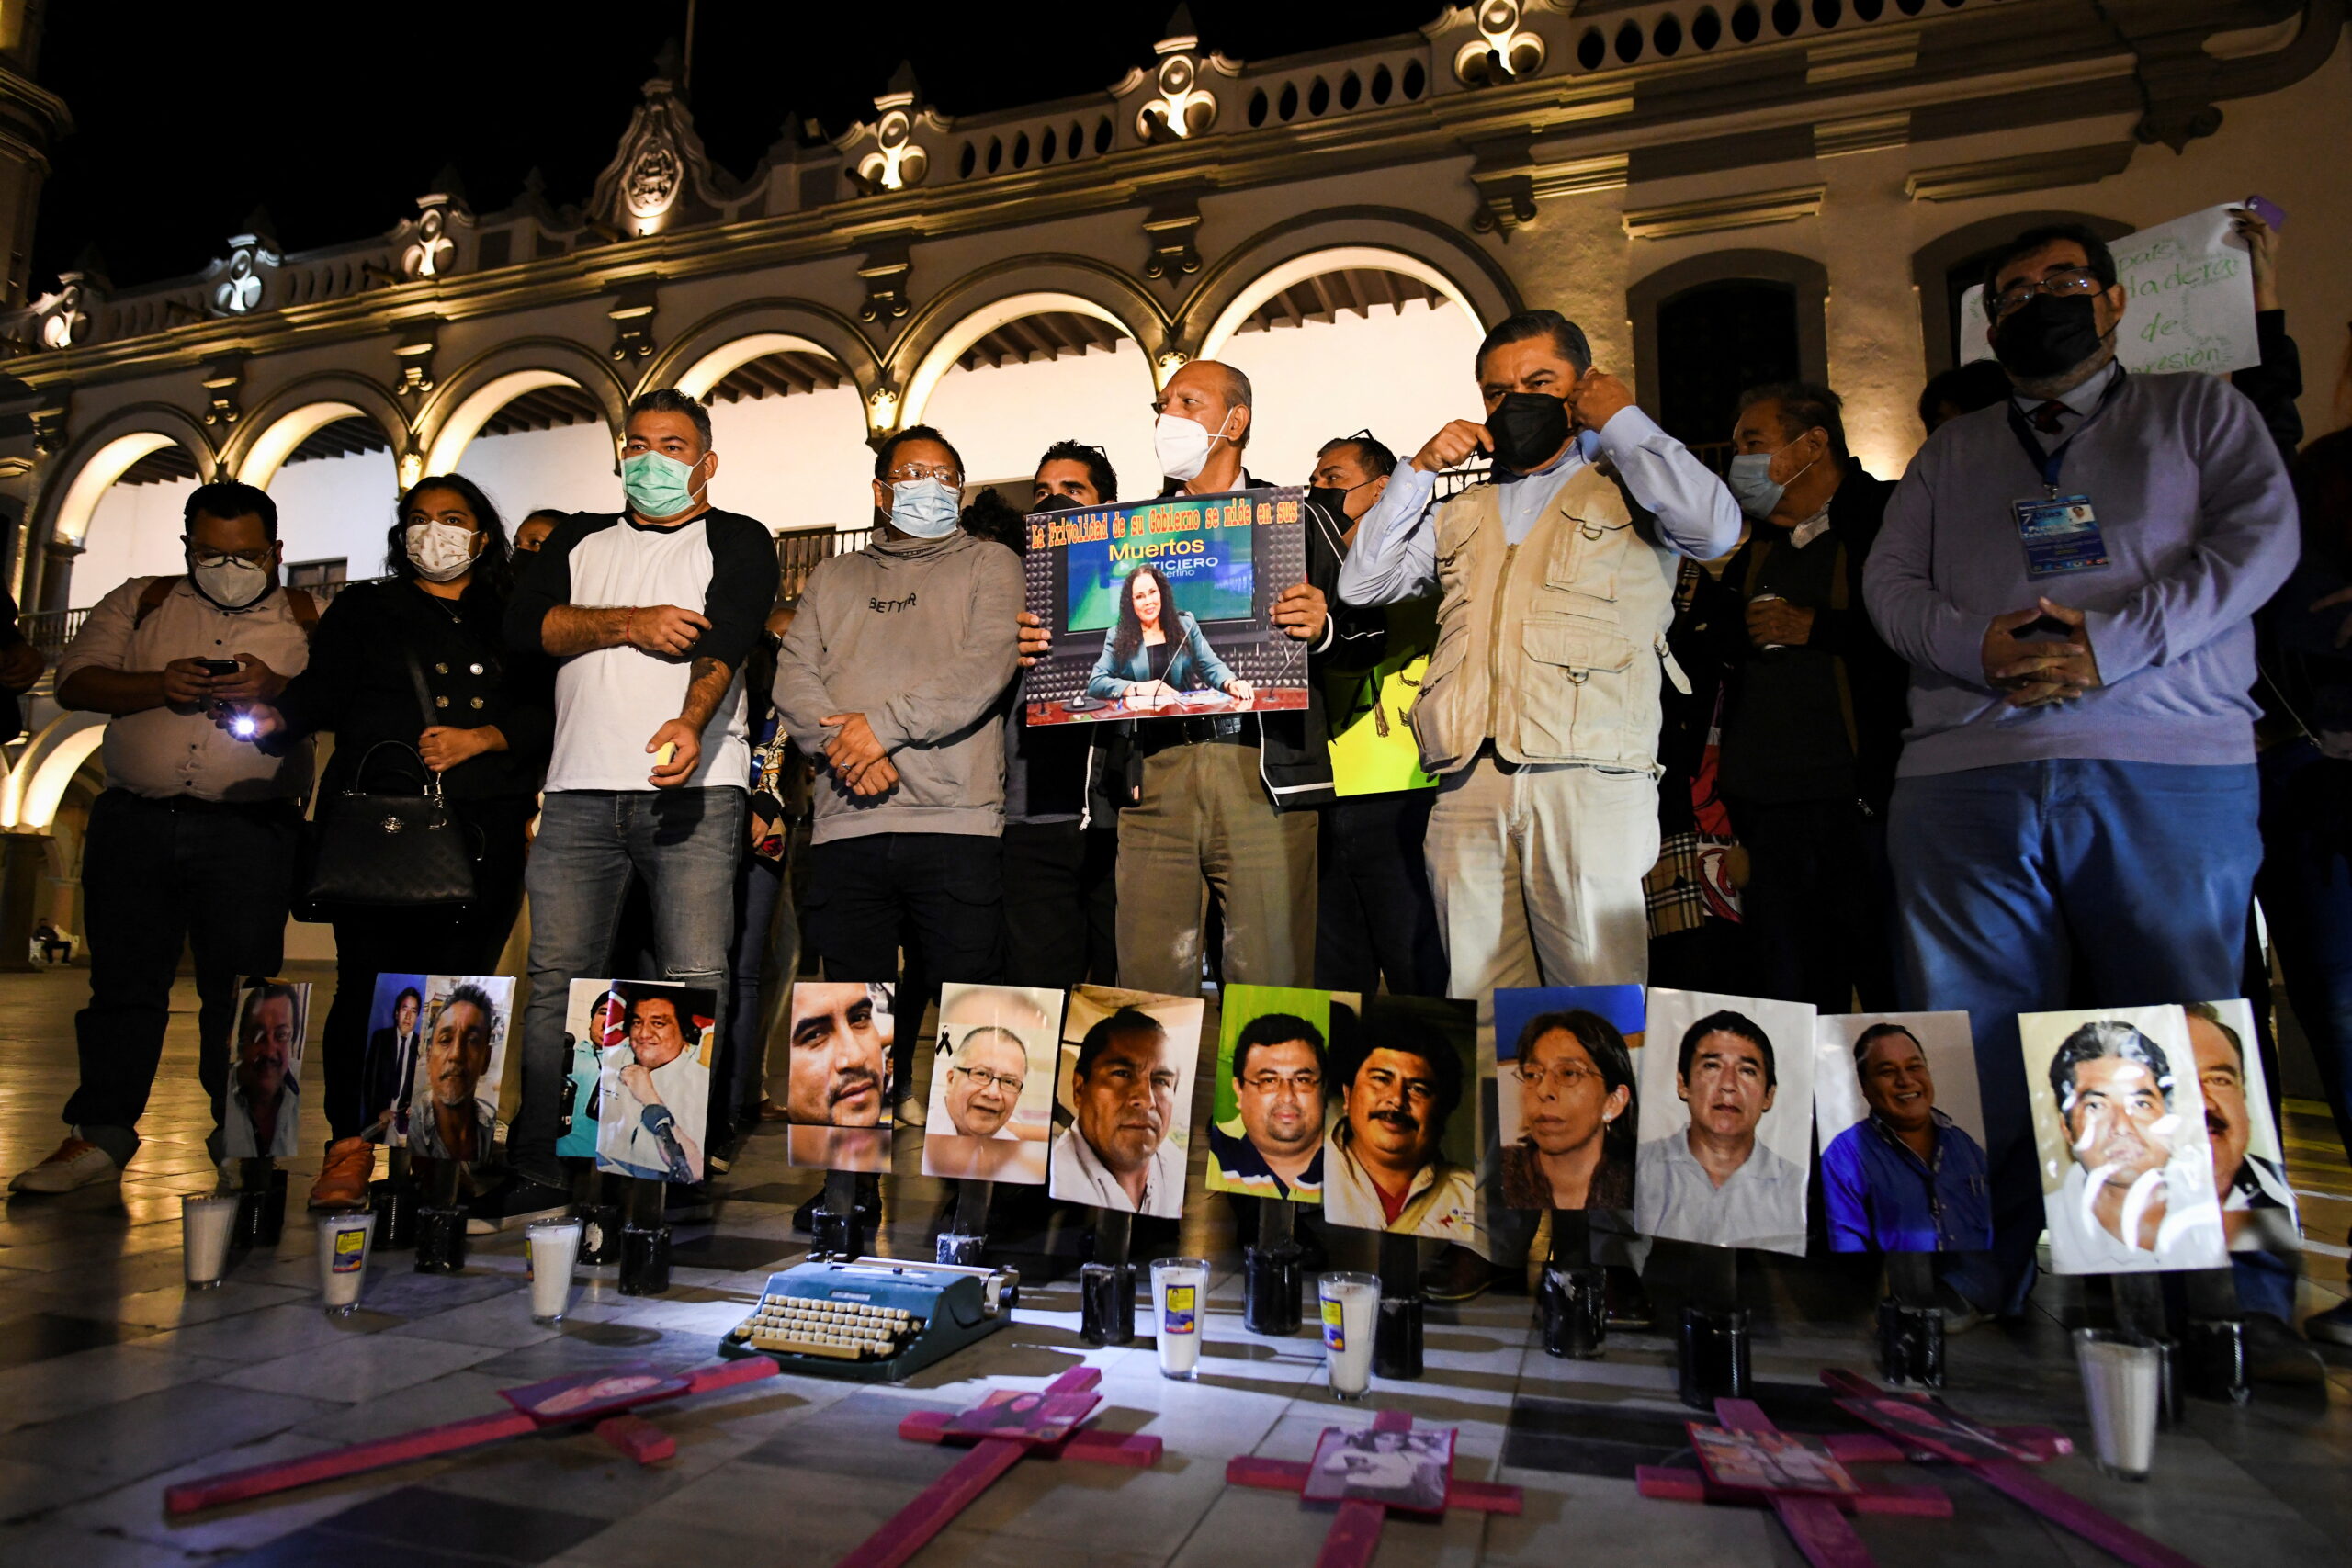 Mexican journalists gather around pictures of murdered colleagues as they protest the recent killings of photojournalist Margarito Martinez and journalist Lourdes Maldonado, in Veracruz, Mexico, on 25 January 2022. Photo: Yahir Ceballos / Reuters